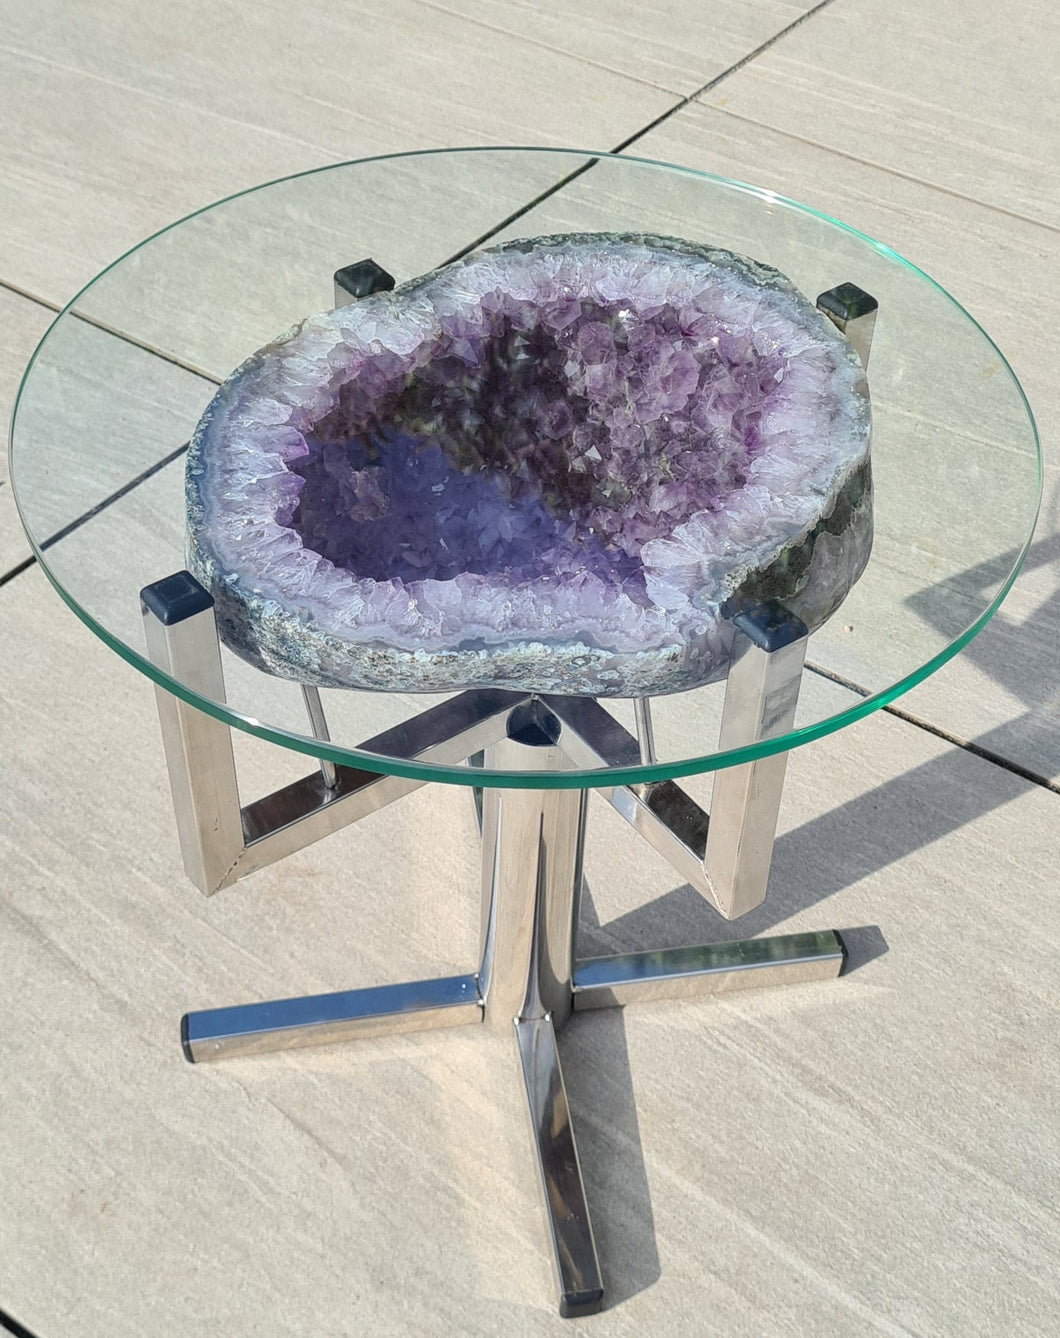 Amethyst Table with Glass on Chrome Stand